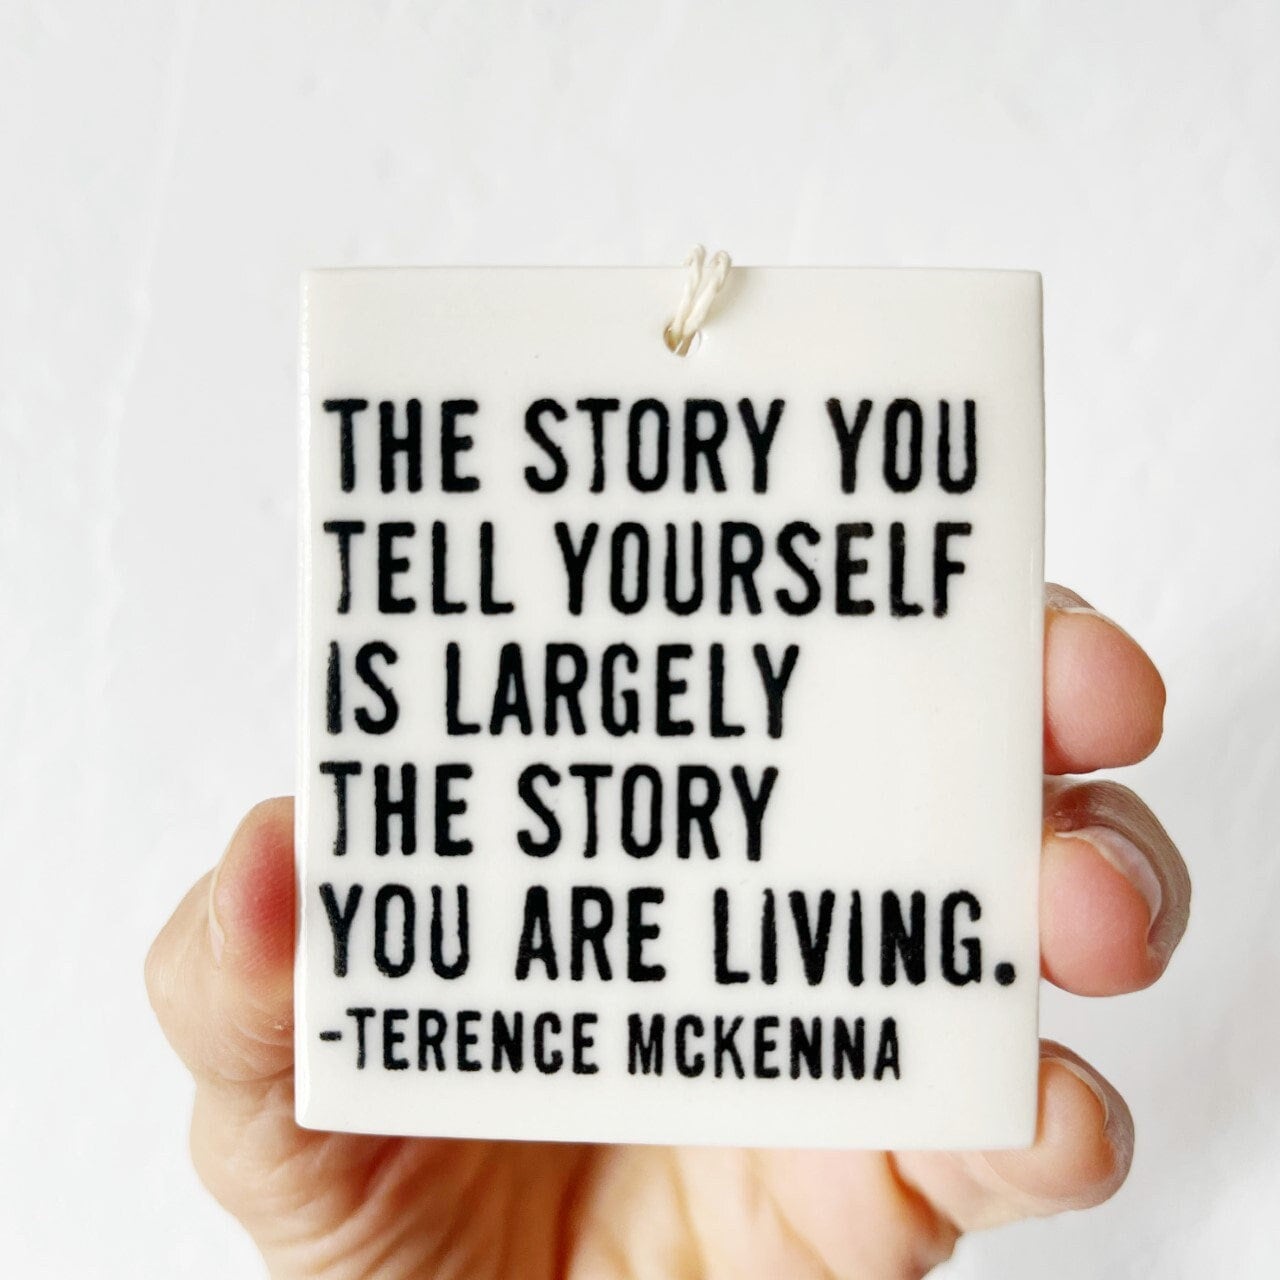 terence mckenna | terrence mckenna | ceramic wall tag | ceramic wall art | screenprinted ceramics | self love | your story | daily reminder